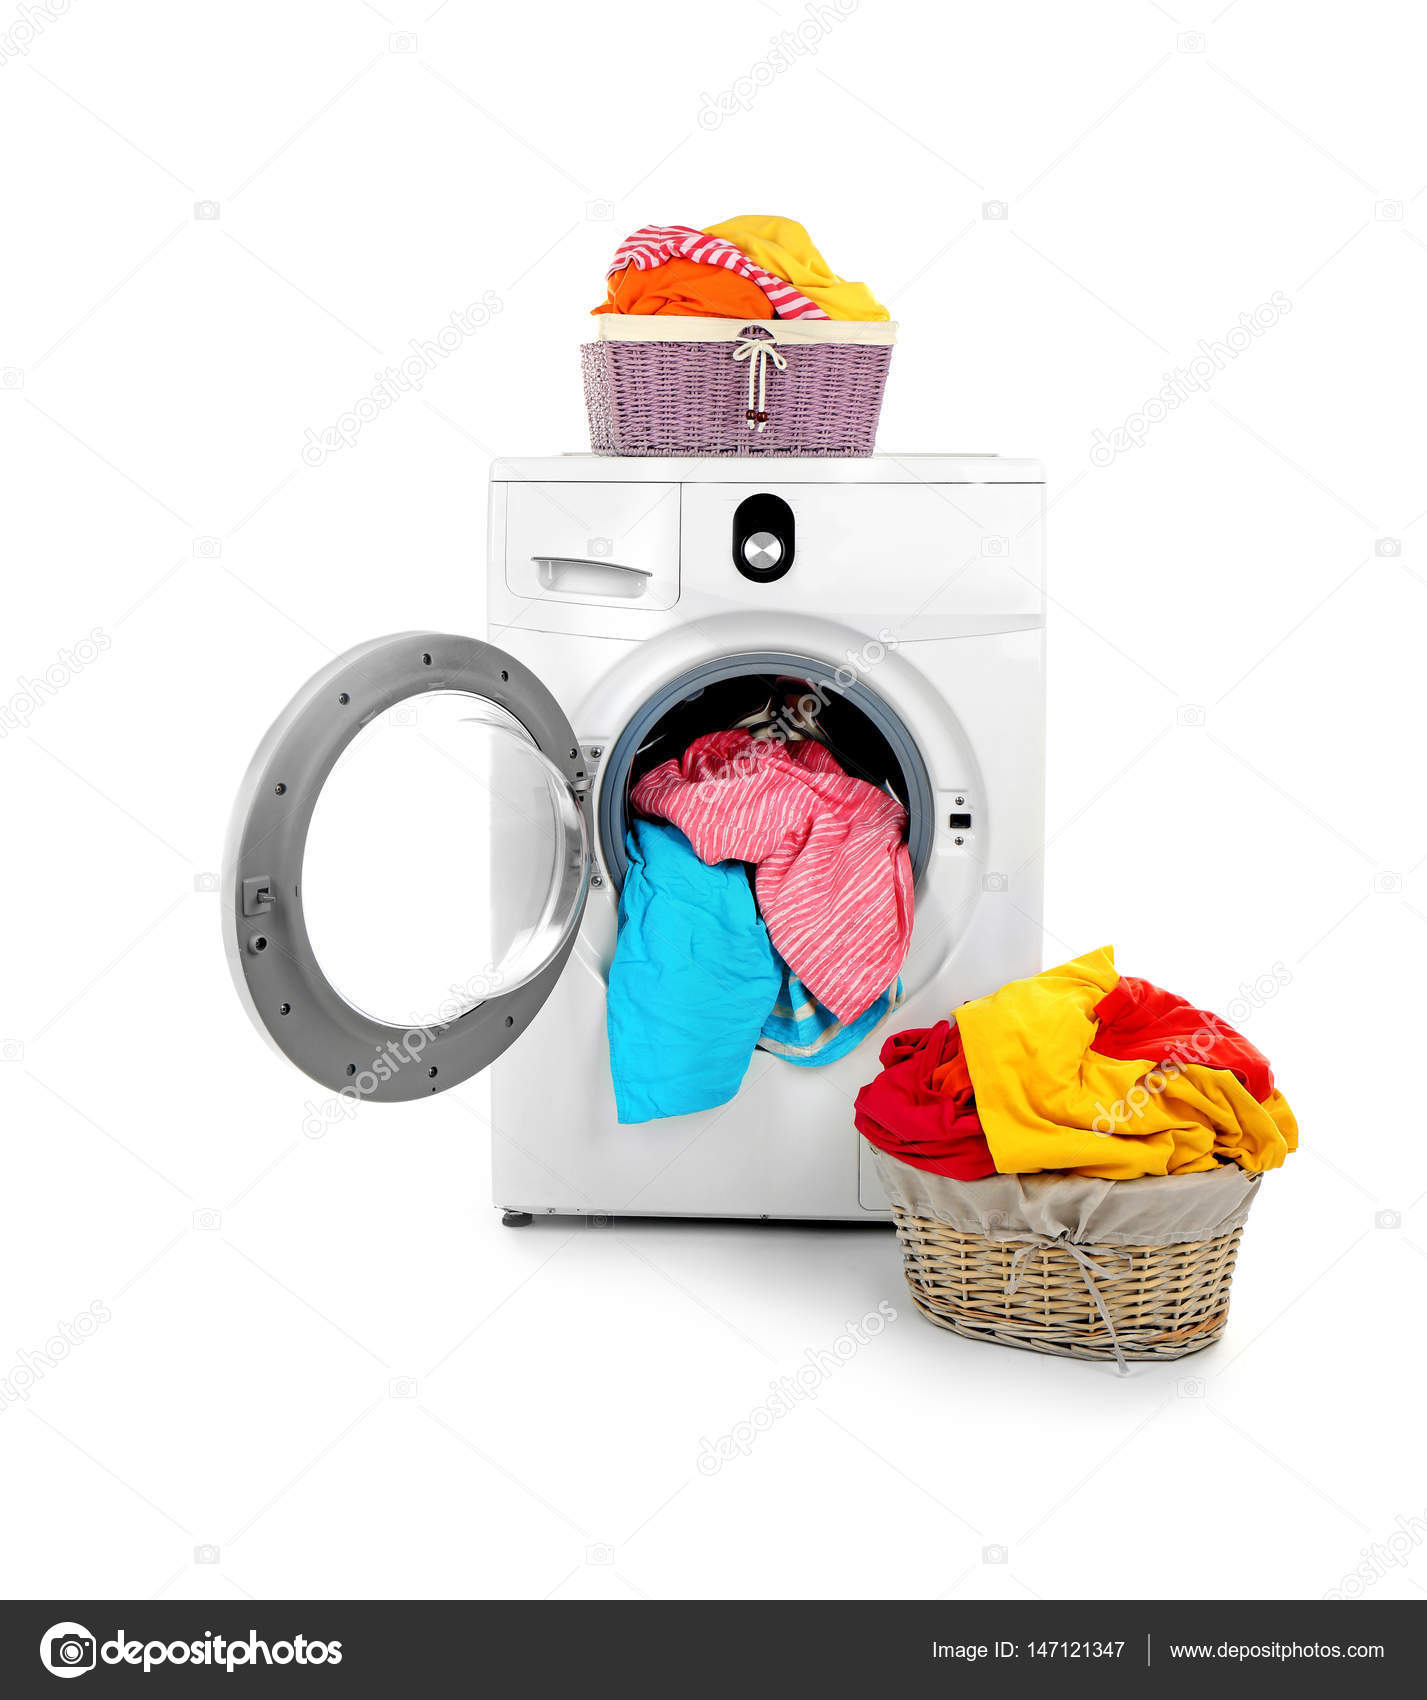 Clothes in washing machine Stock Photo by ©belchonock 147121347